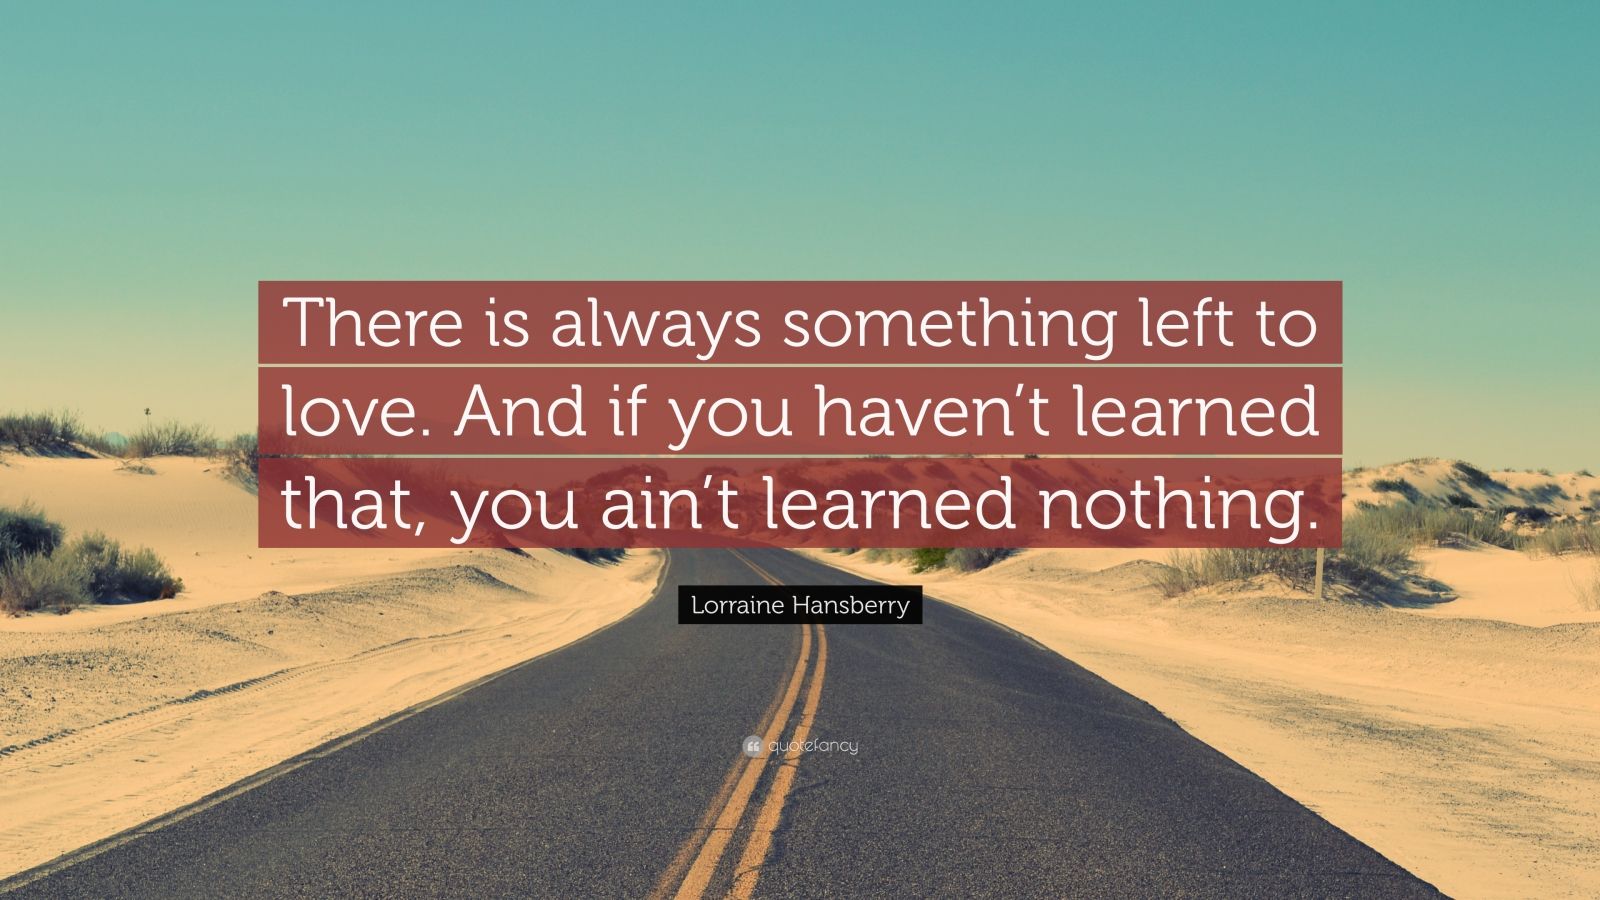 Lorraine Hansberry Quote: "There is always something left ...